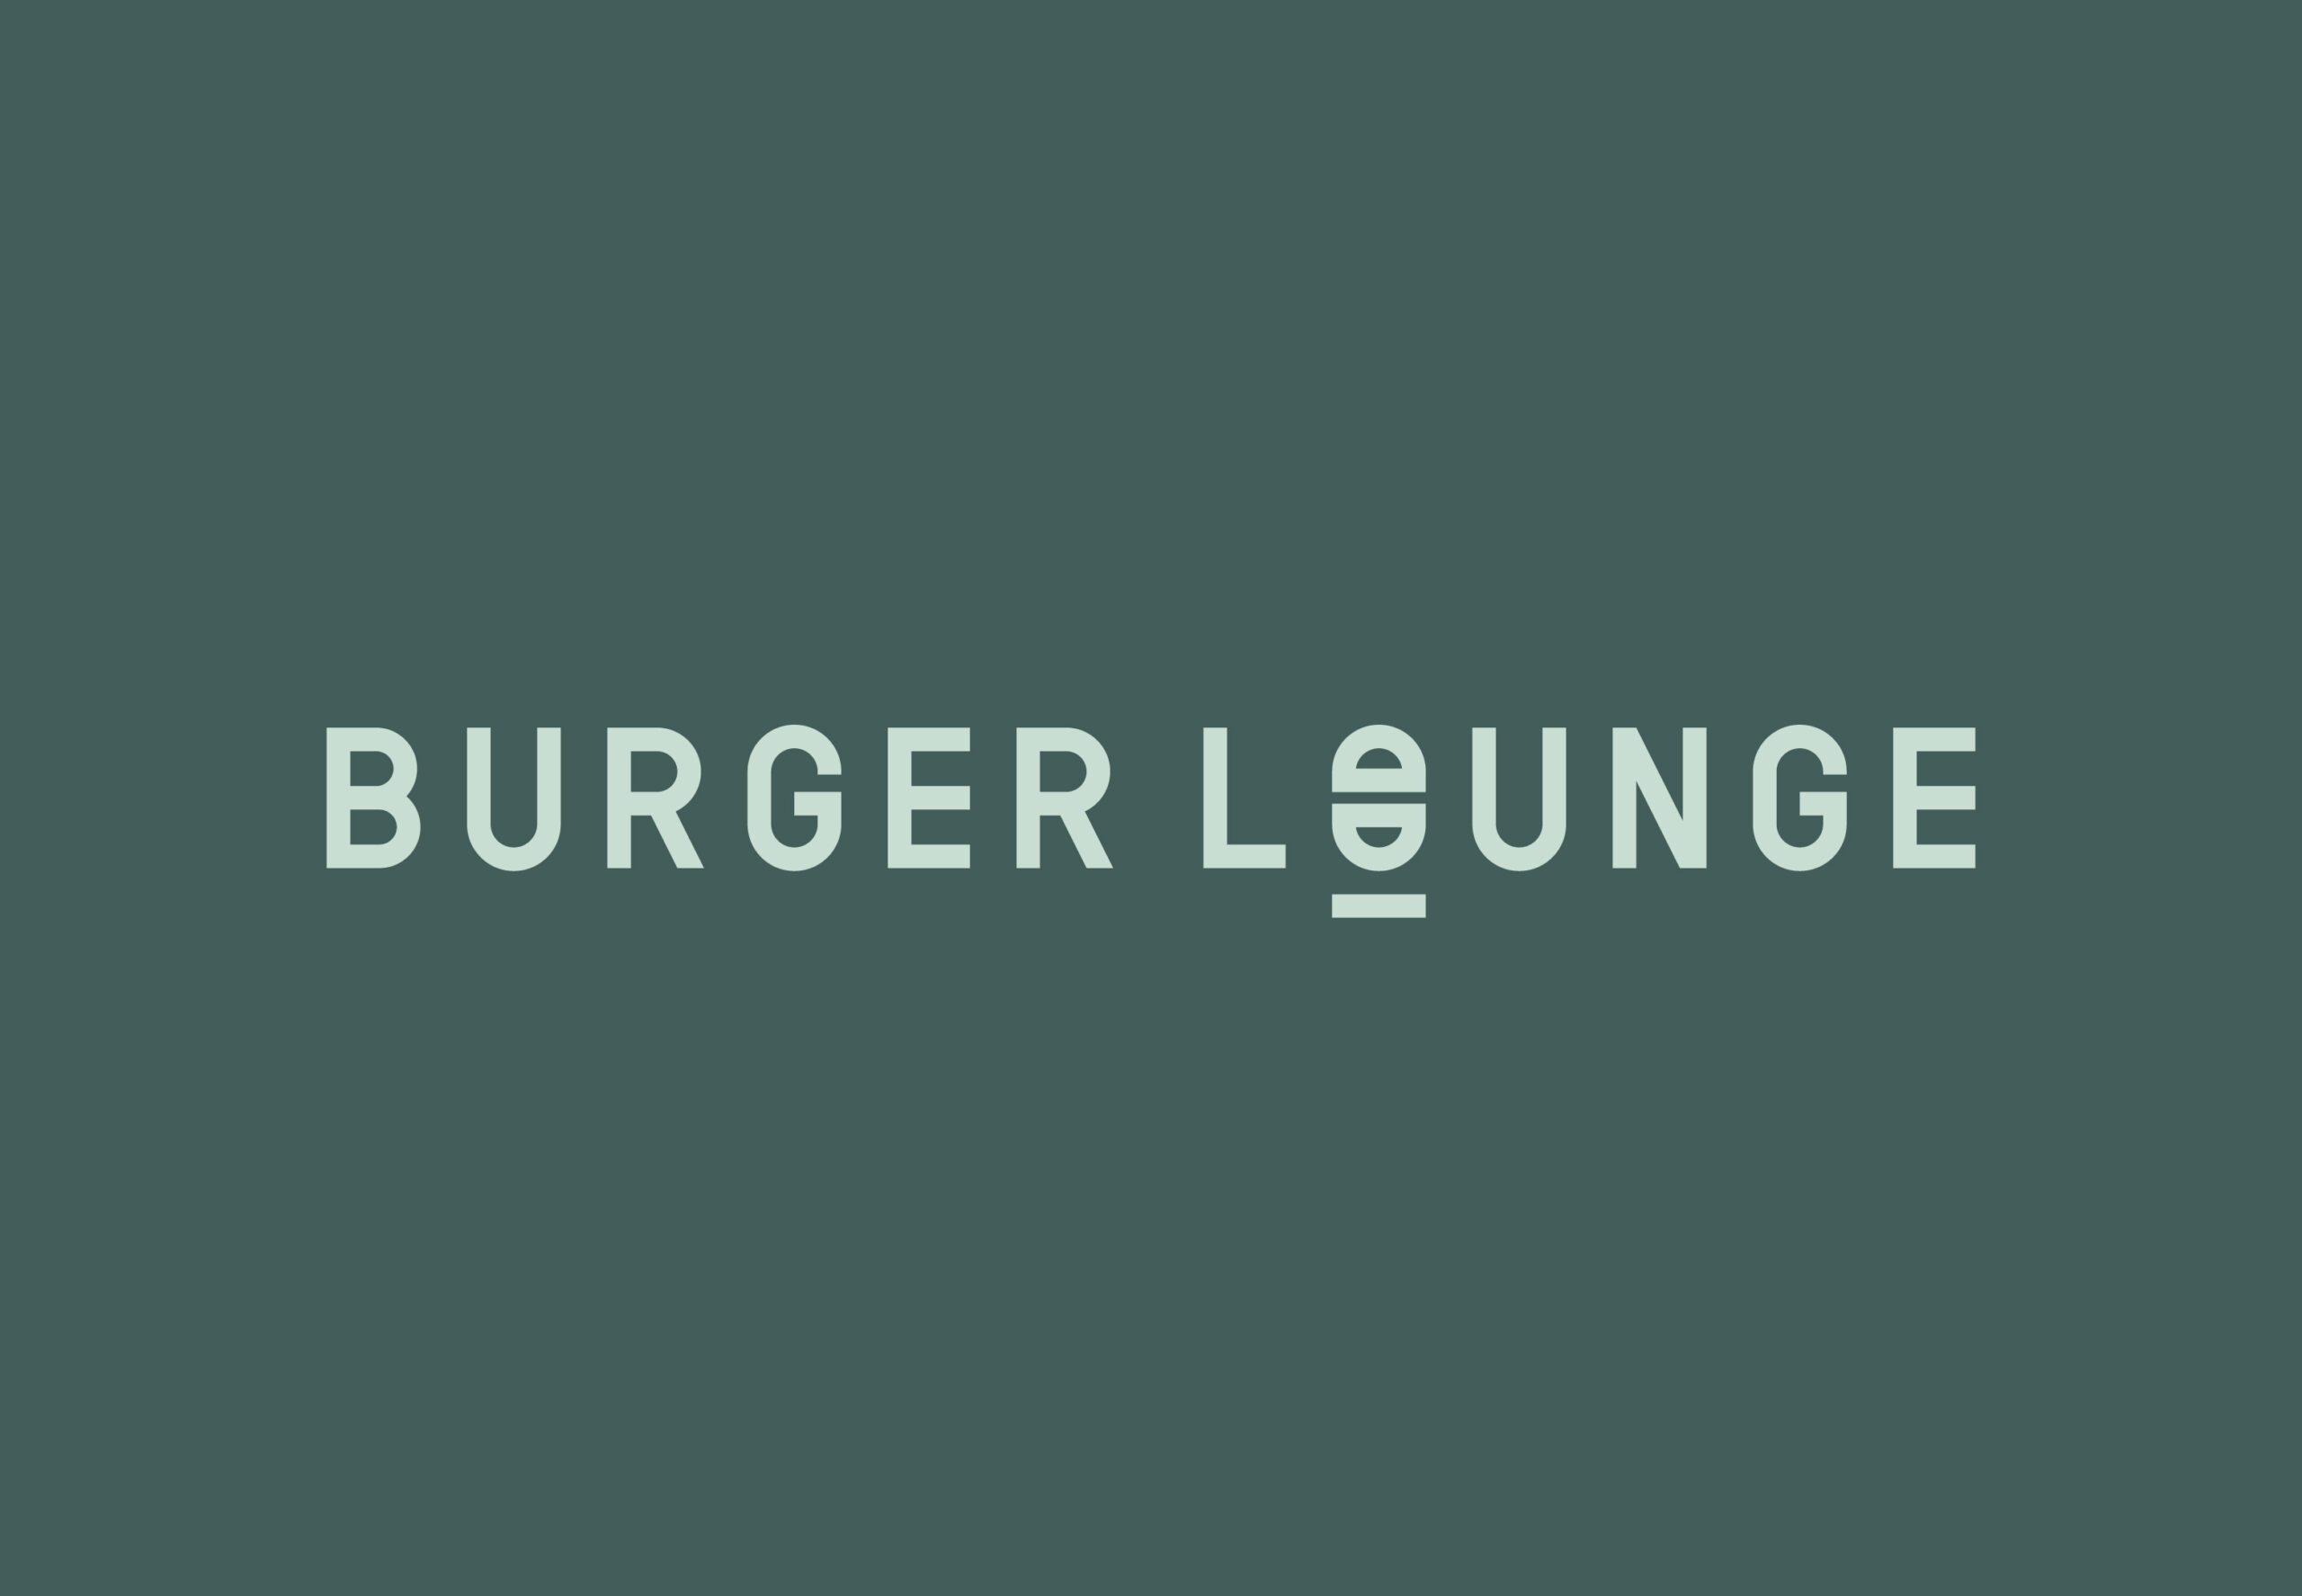 Burger-Lounge-Brand-Facelift-By-Millimeter-Creative-Agency-A01-01